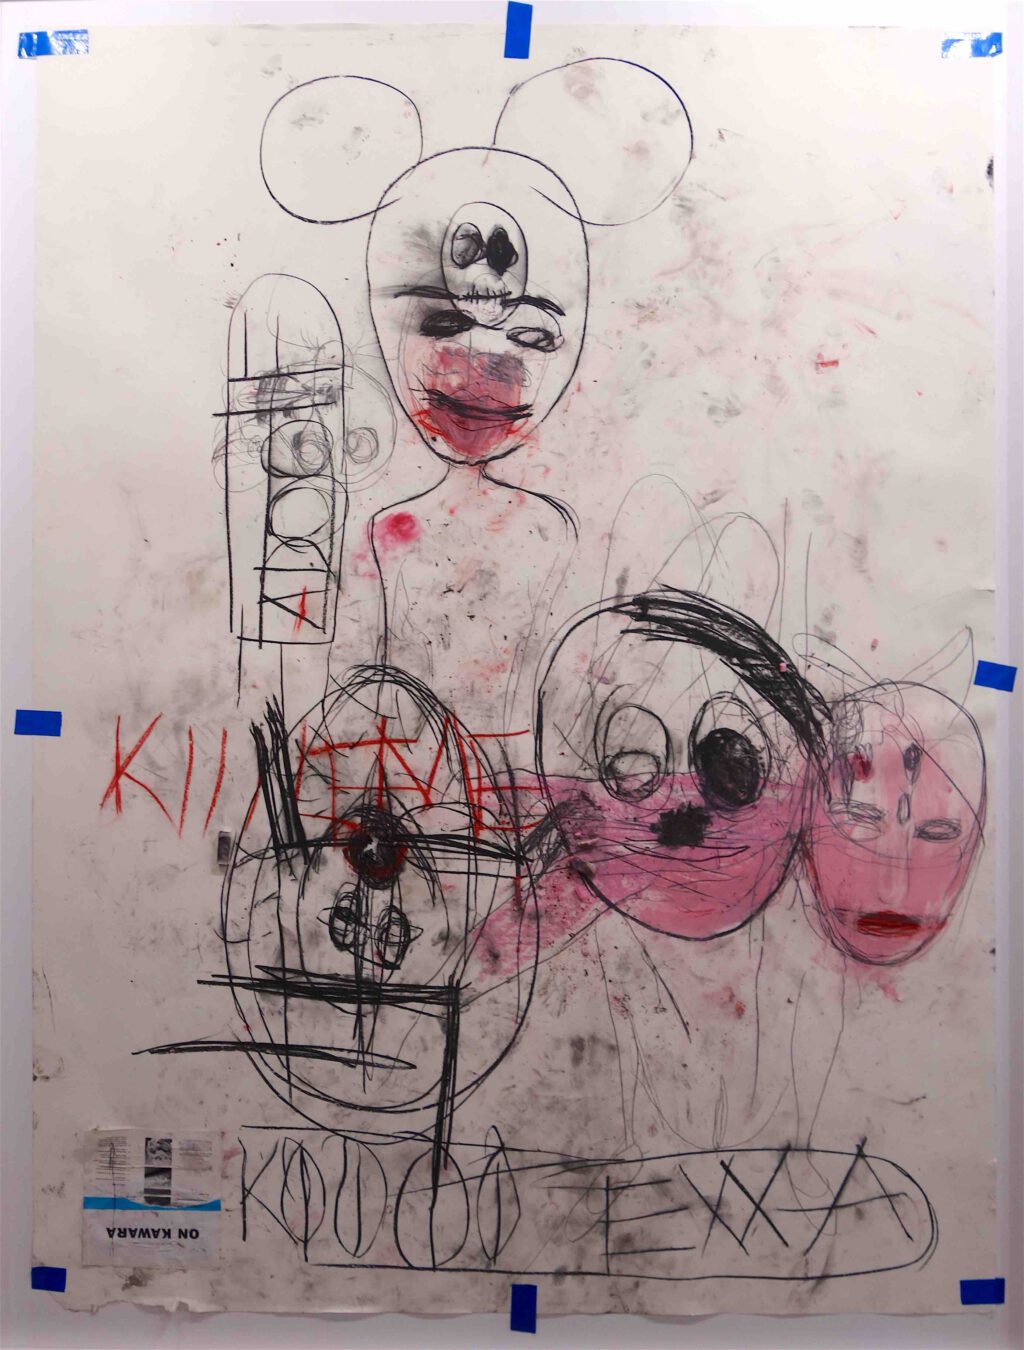 Paul McCarthy A&E, EXXA, Santa Anita session 2020 Charcoal, pastel, and collage on paper 245.1 x 182.9 cm (McCAR106115)(Hauser & Wirth)